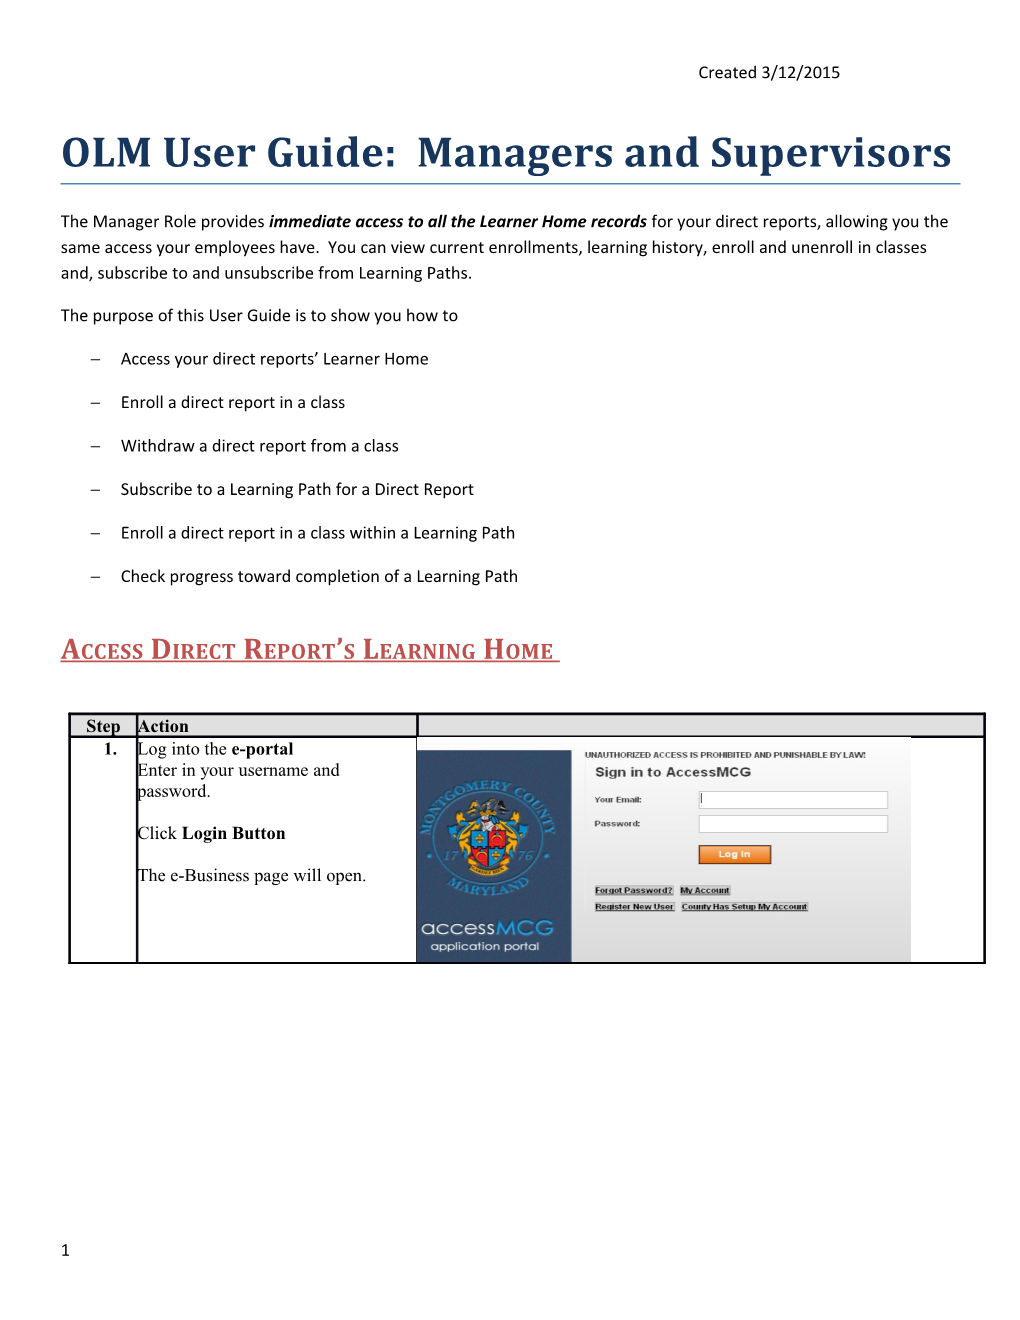 OLM User Guide: Managers and Supervisors